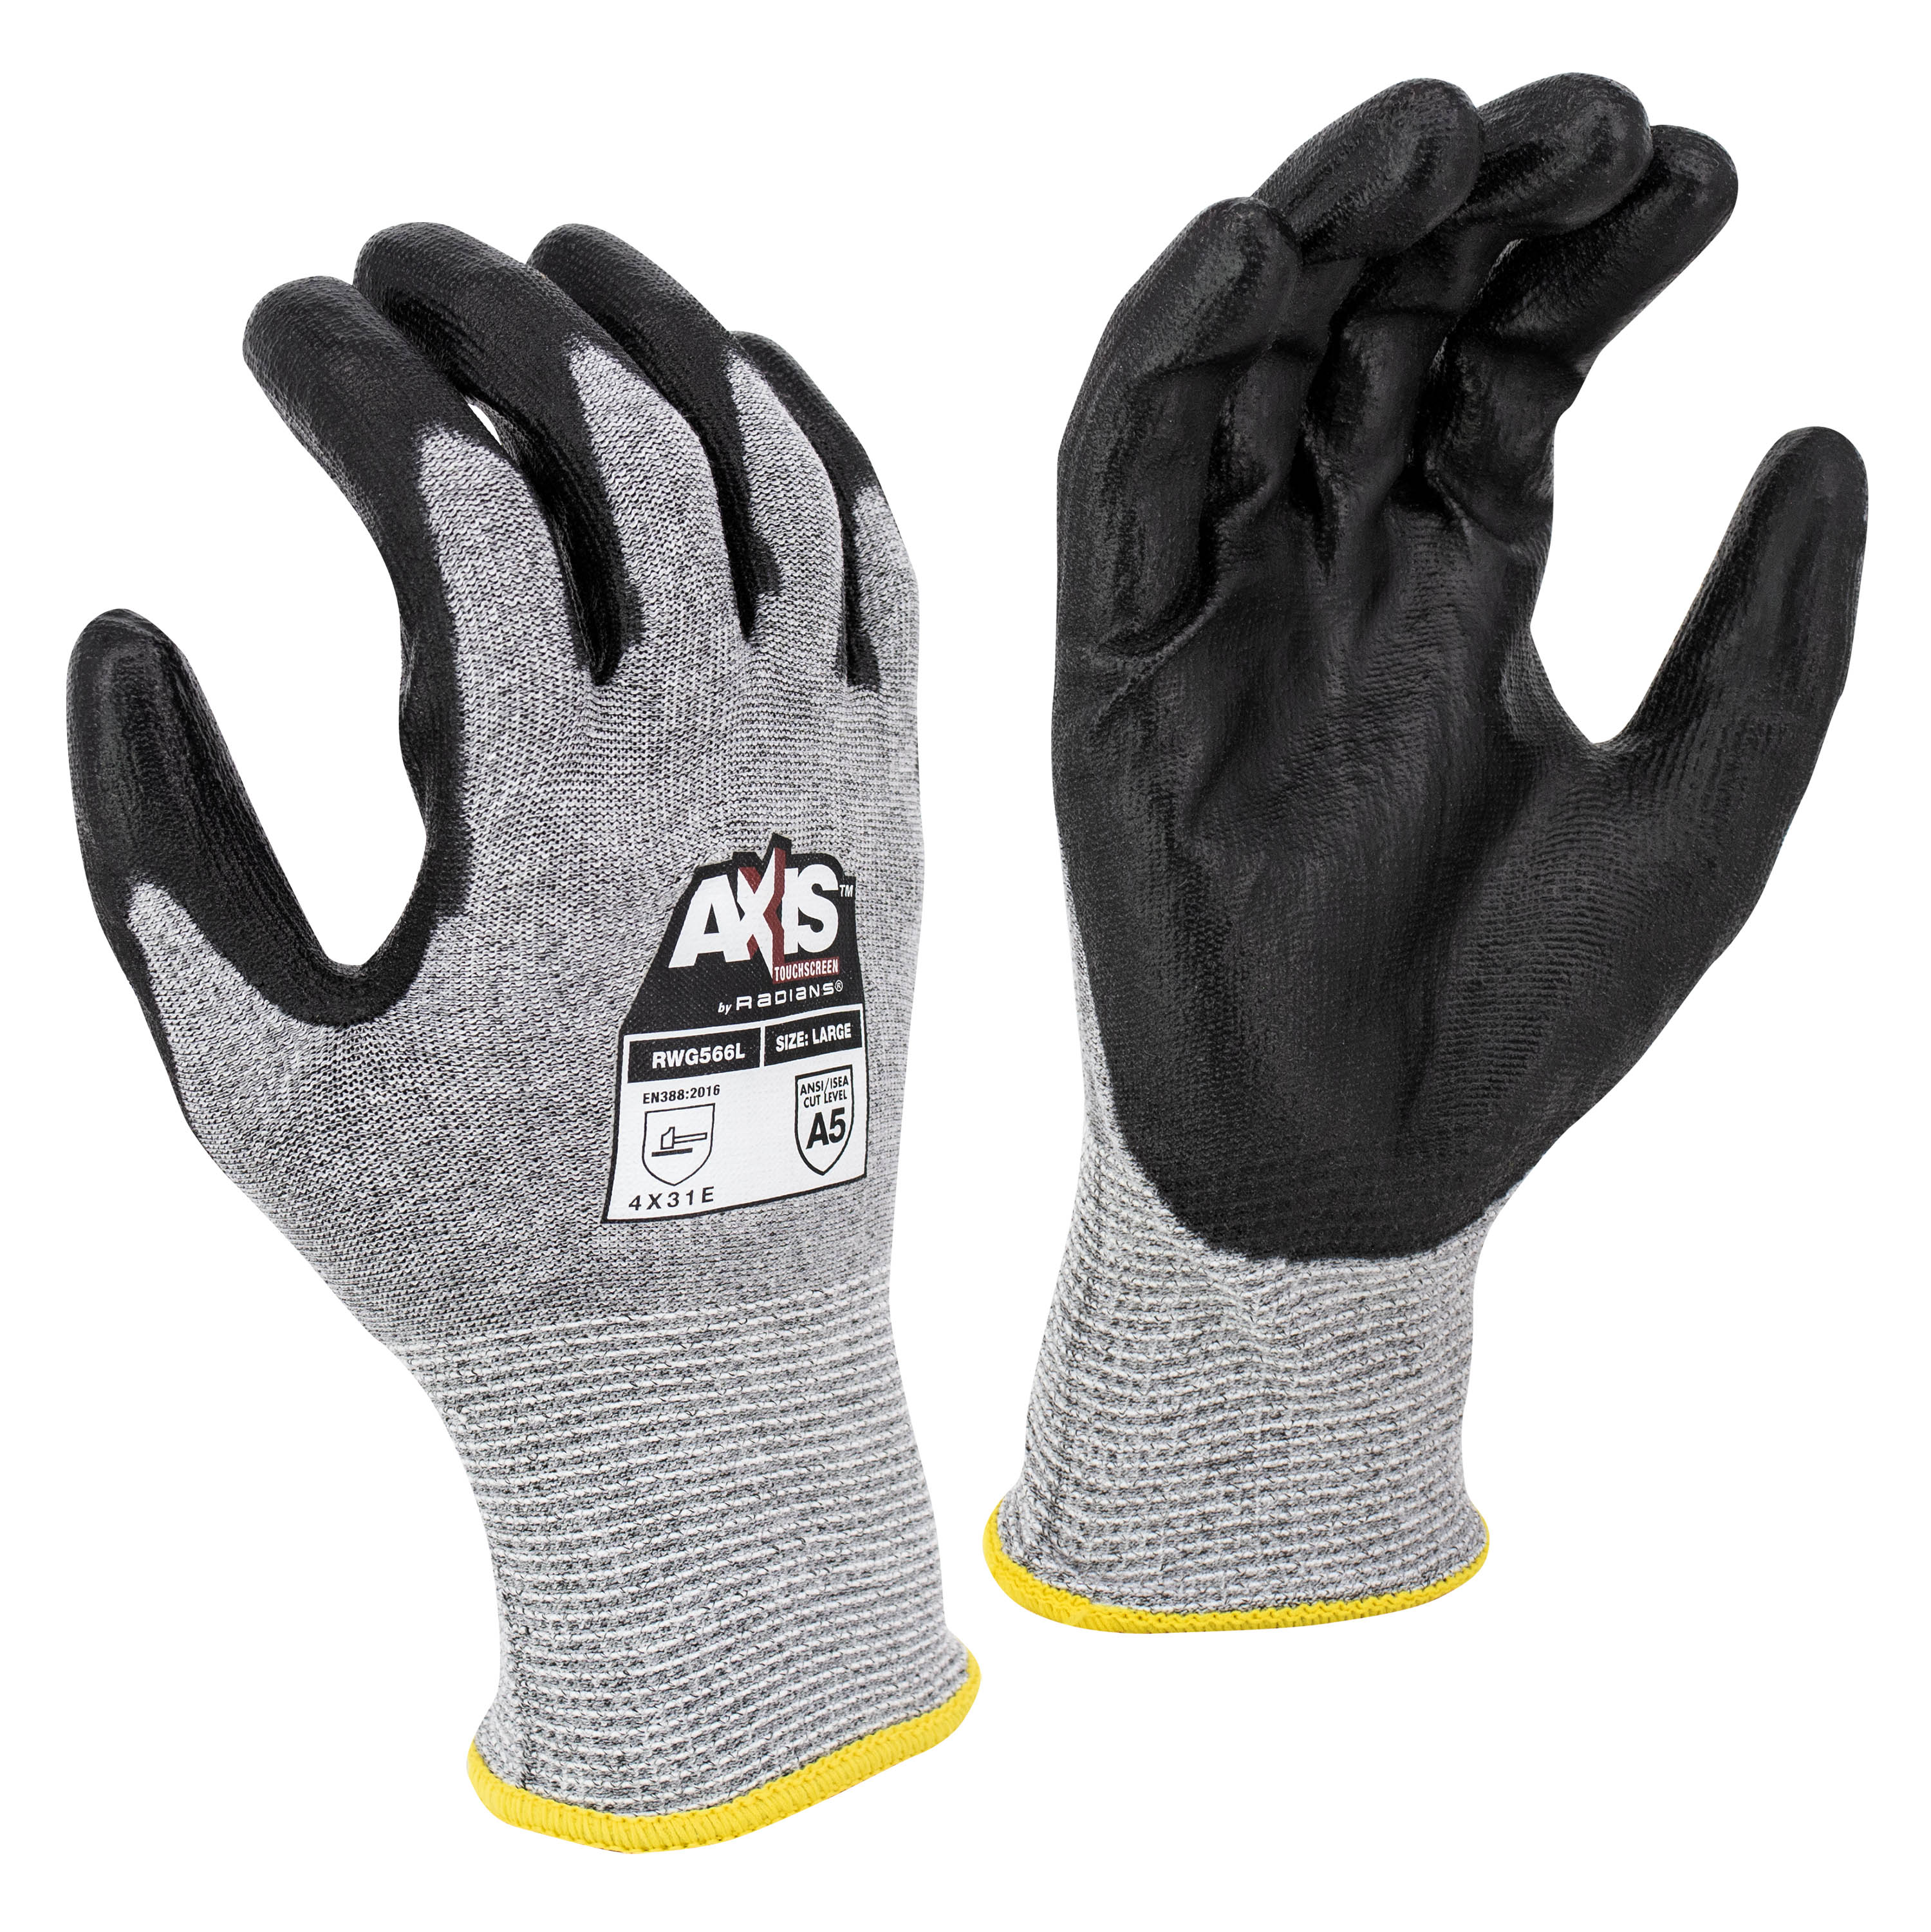 RWG566 AXIS™ Cut Protection Level A5 Touchscreen Work Glove - Size M